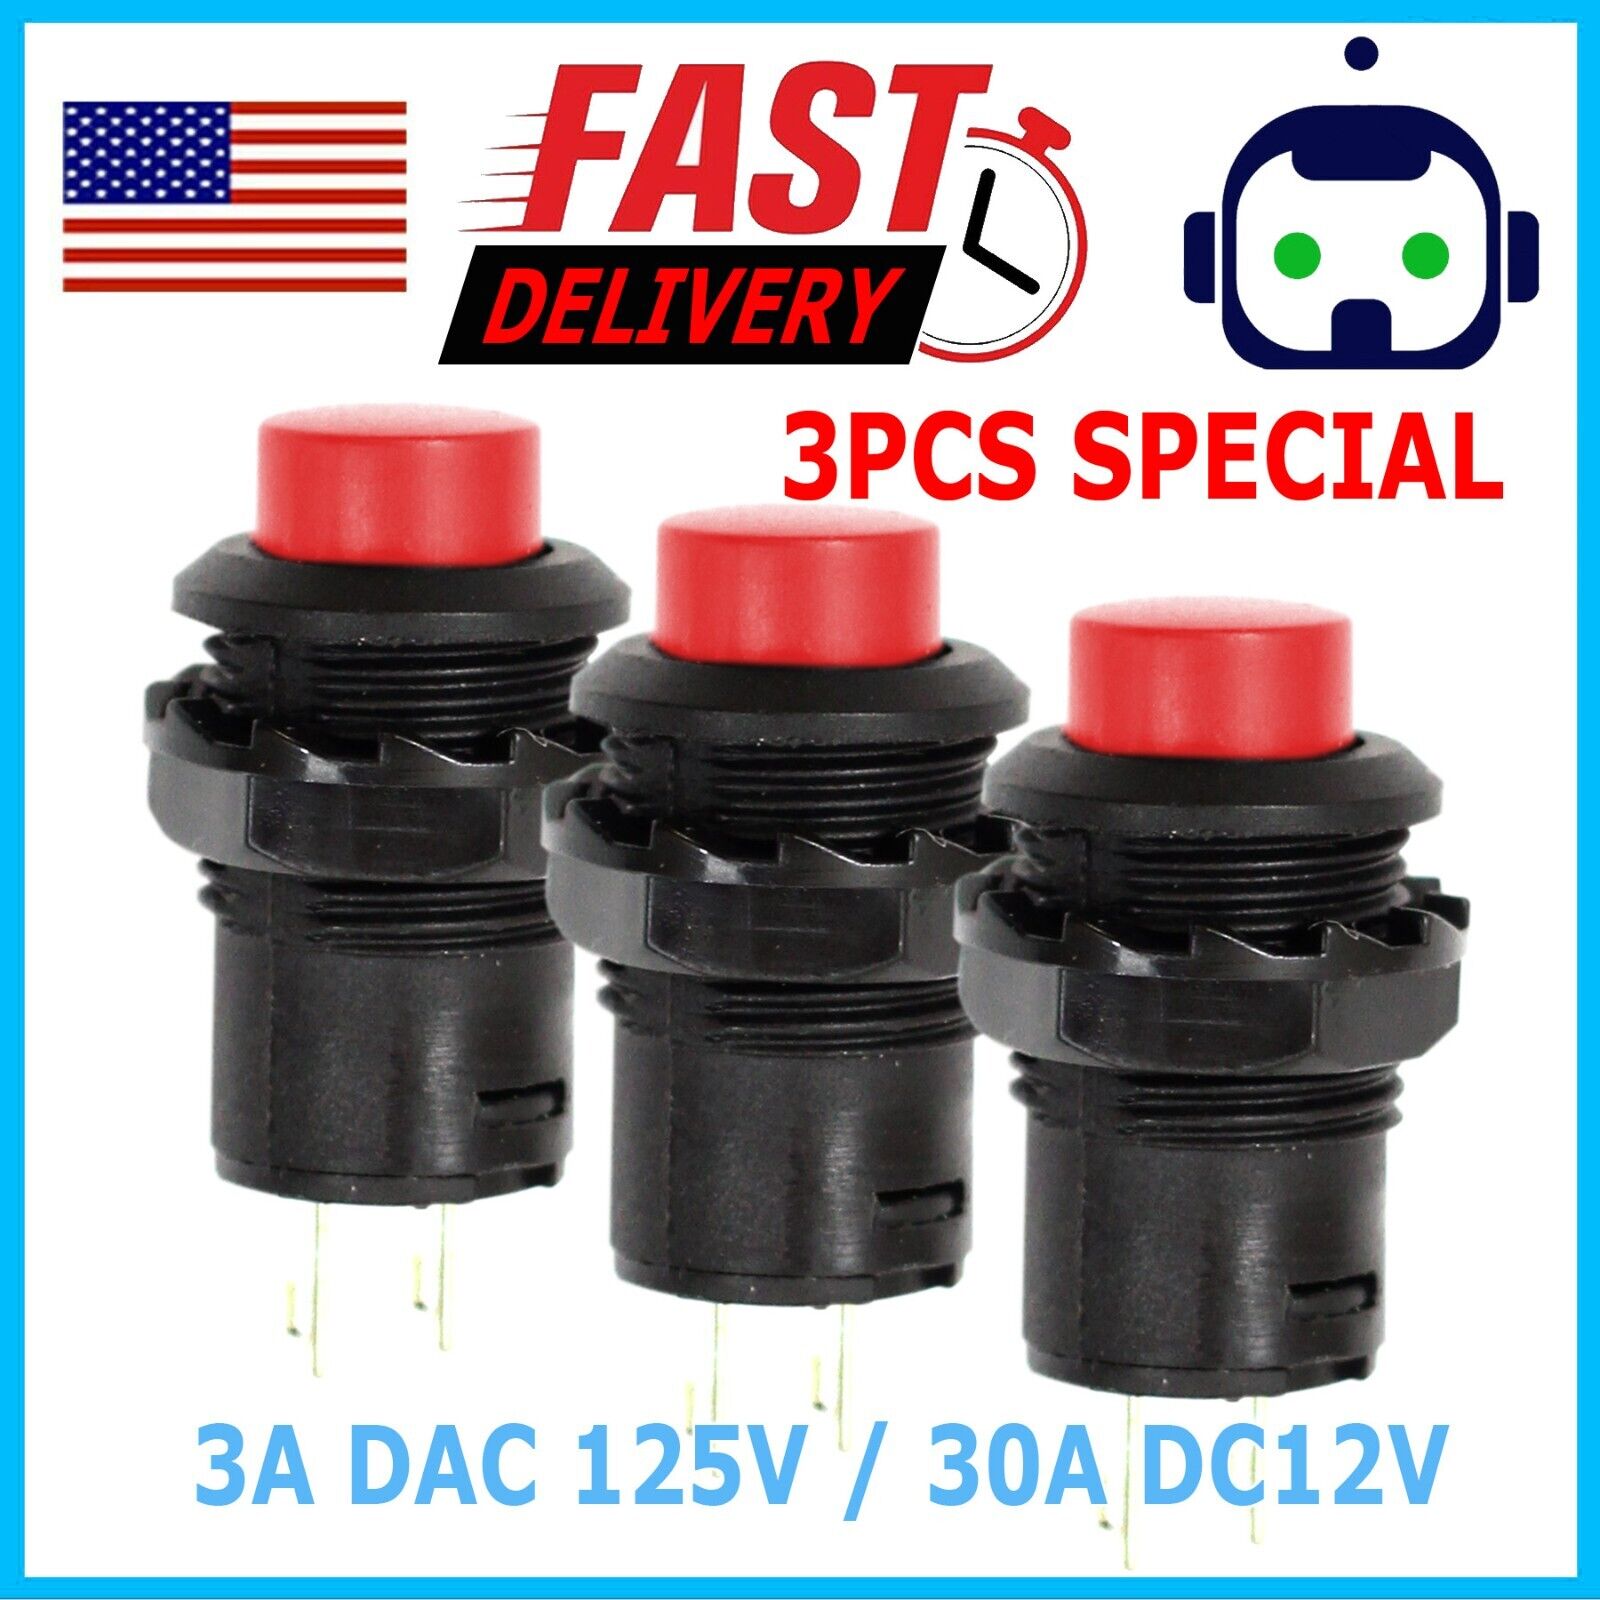 New 3 Pack SPST Normally On/Off Open Momentary Push Button Switch Red